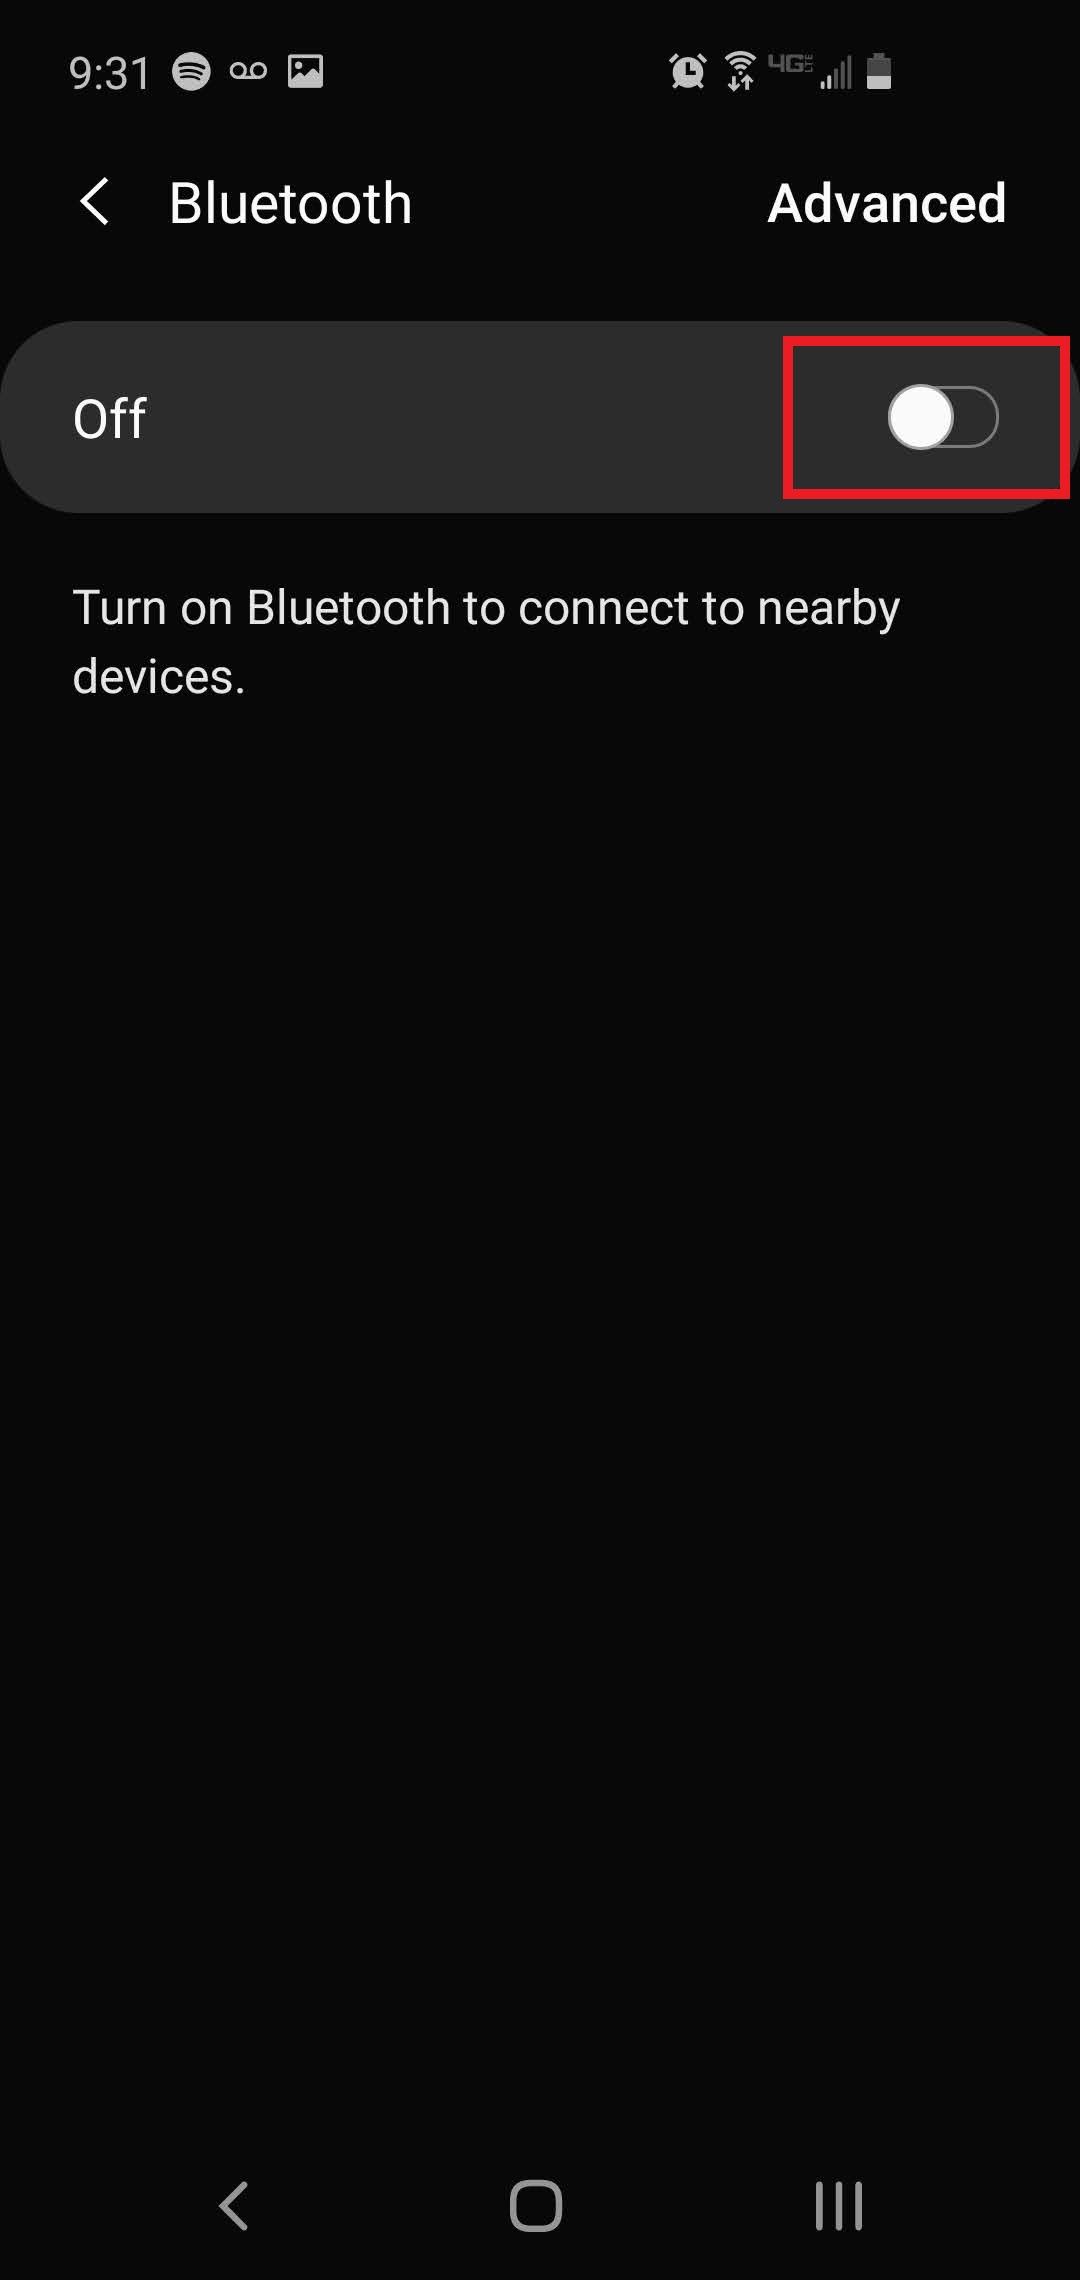 A screenshot displaying how to use Bluetooth on Android with the Bluetooth menu open and Bluetooth toggle (off) highlighted to show how to enable it.